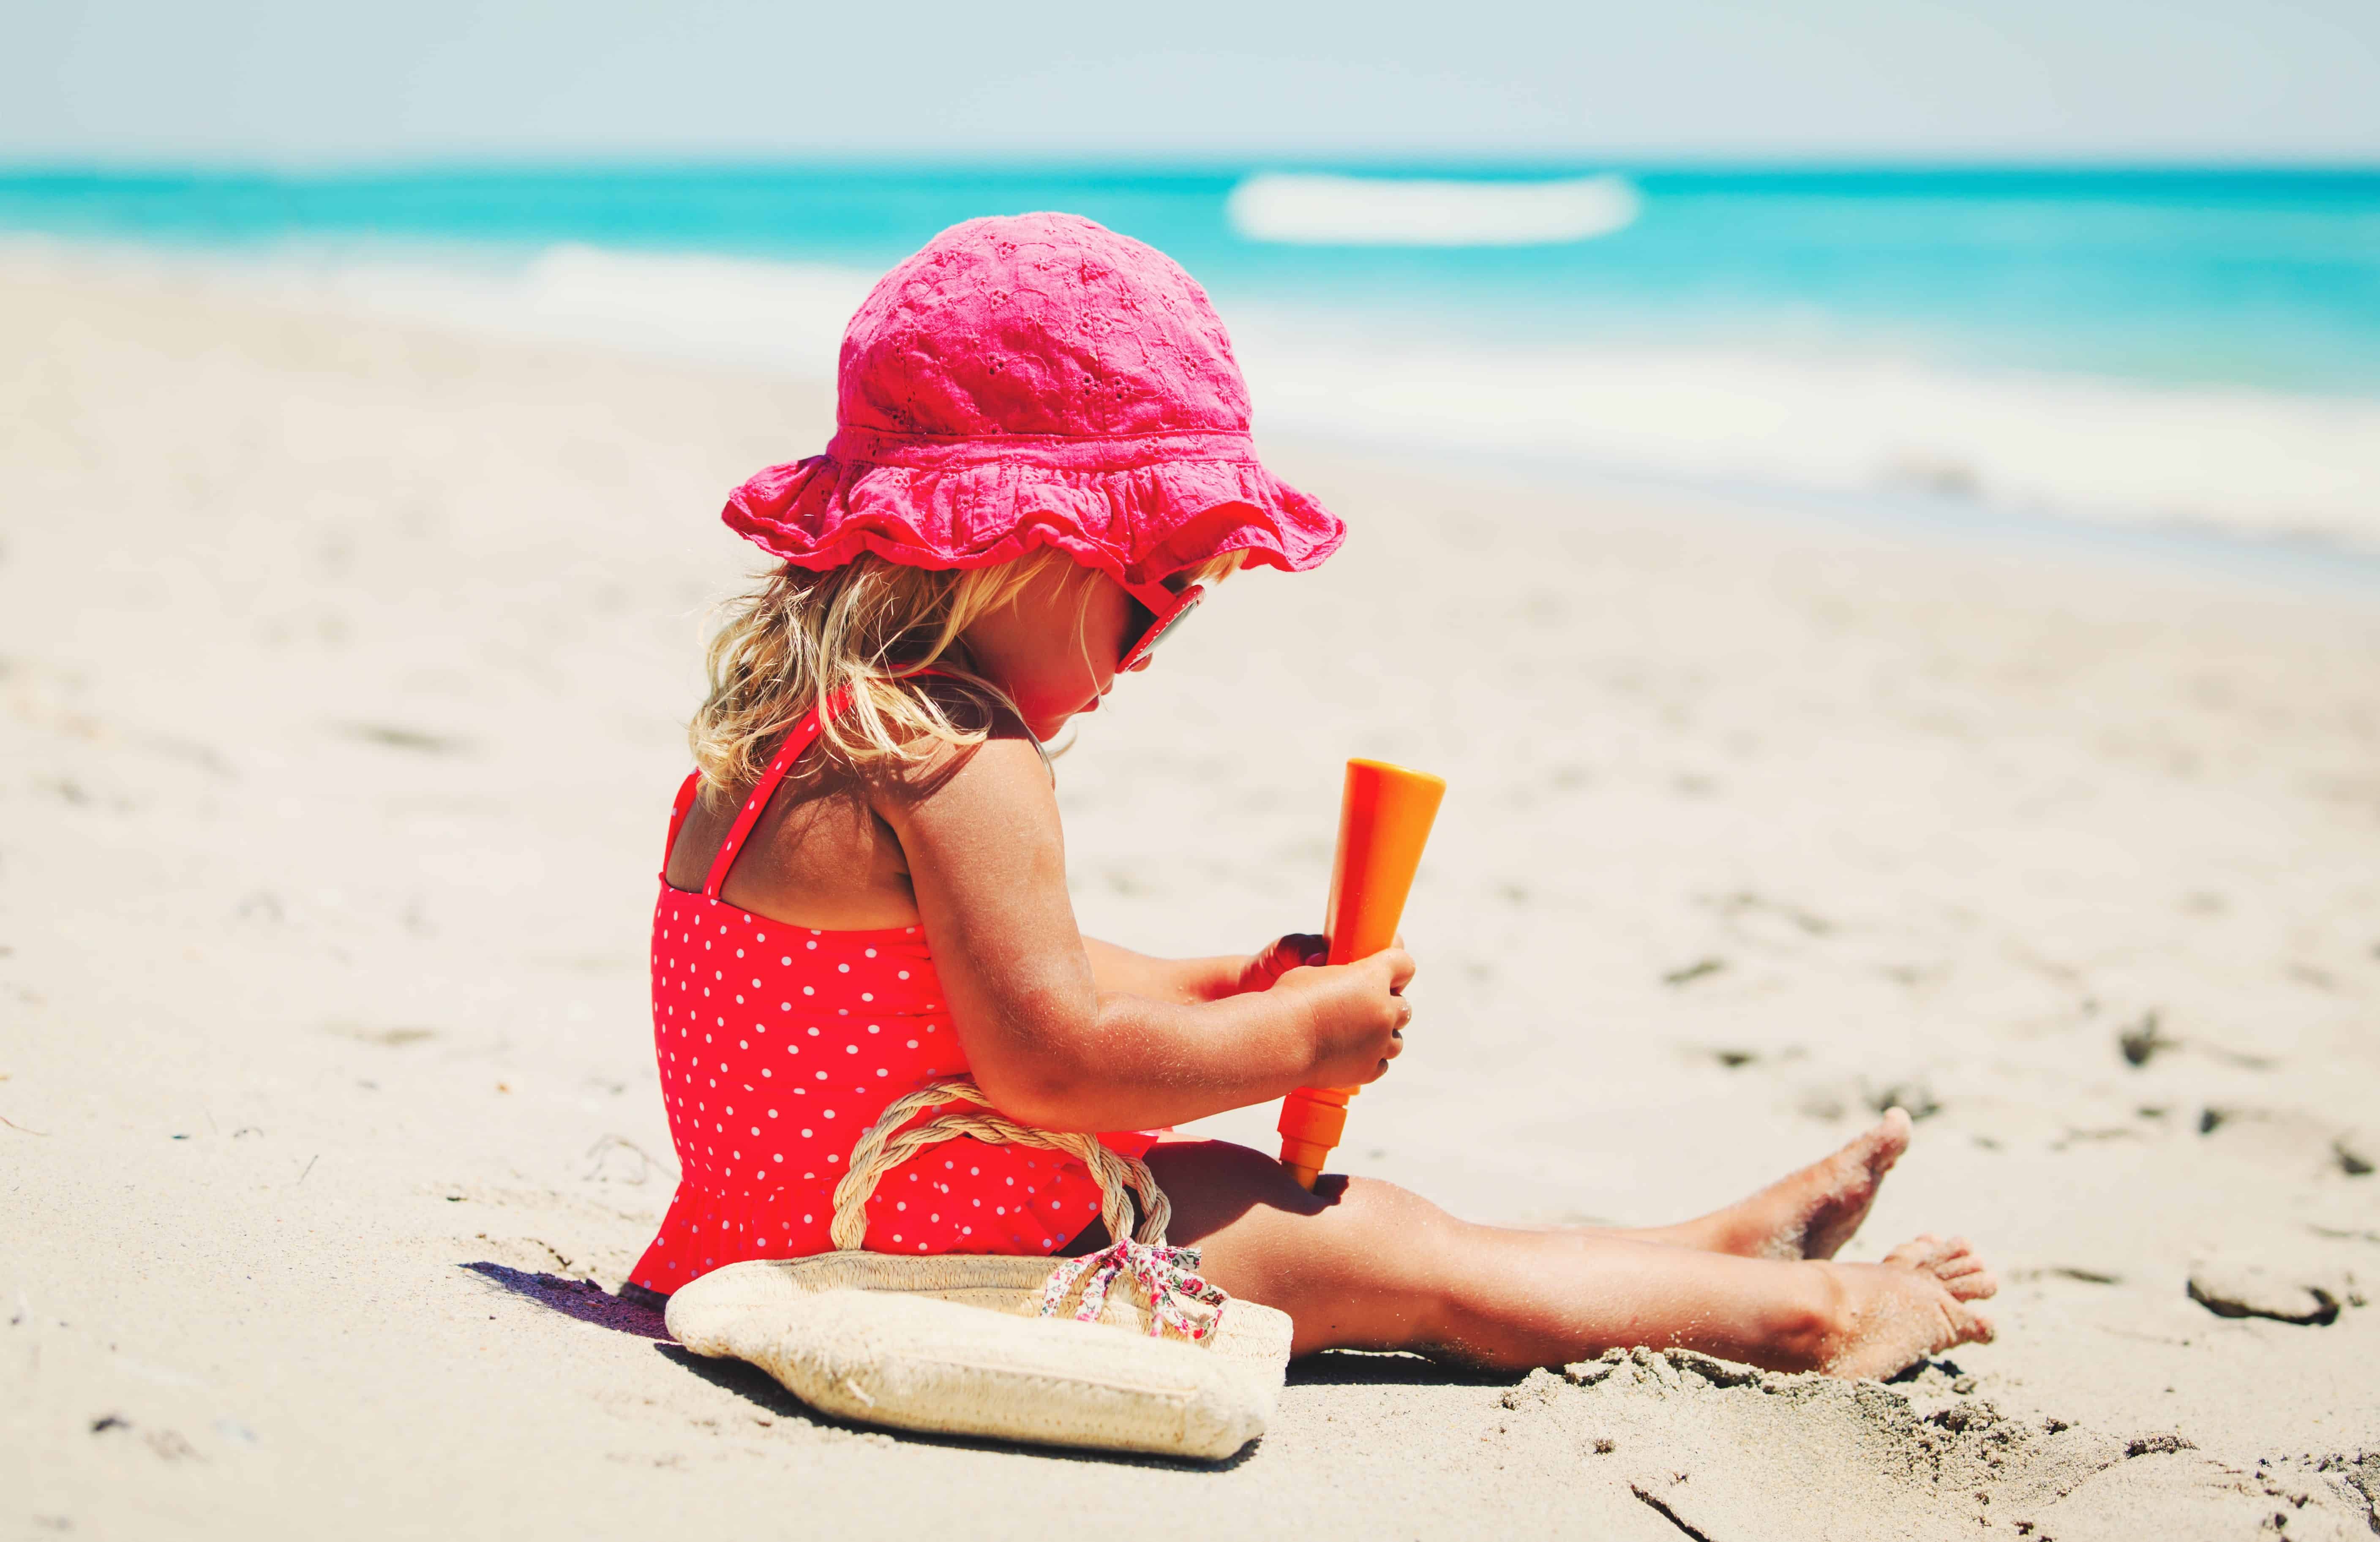 Toddler Sun Protection: Are you wondering what the best sunscreen is for your toddler? Find out which sunscreen will work well with your toddler and how to get it on them. Protect your toddler's skin while you are participating in outdoor activities. Have fun with your toddler without the sunburns